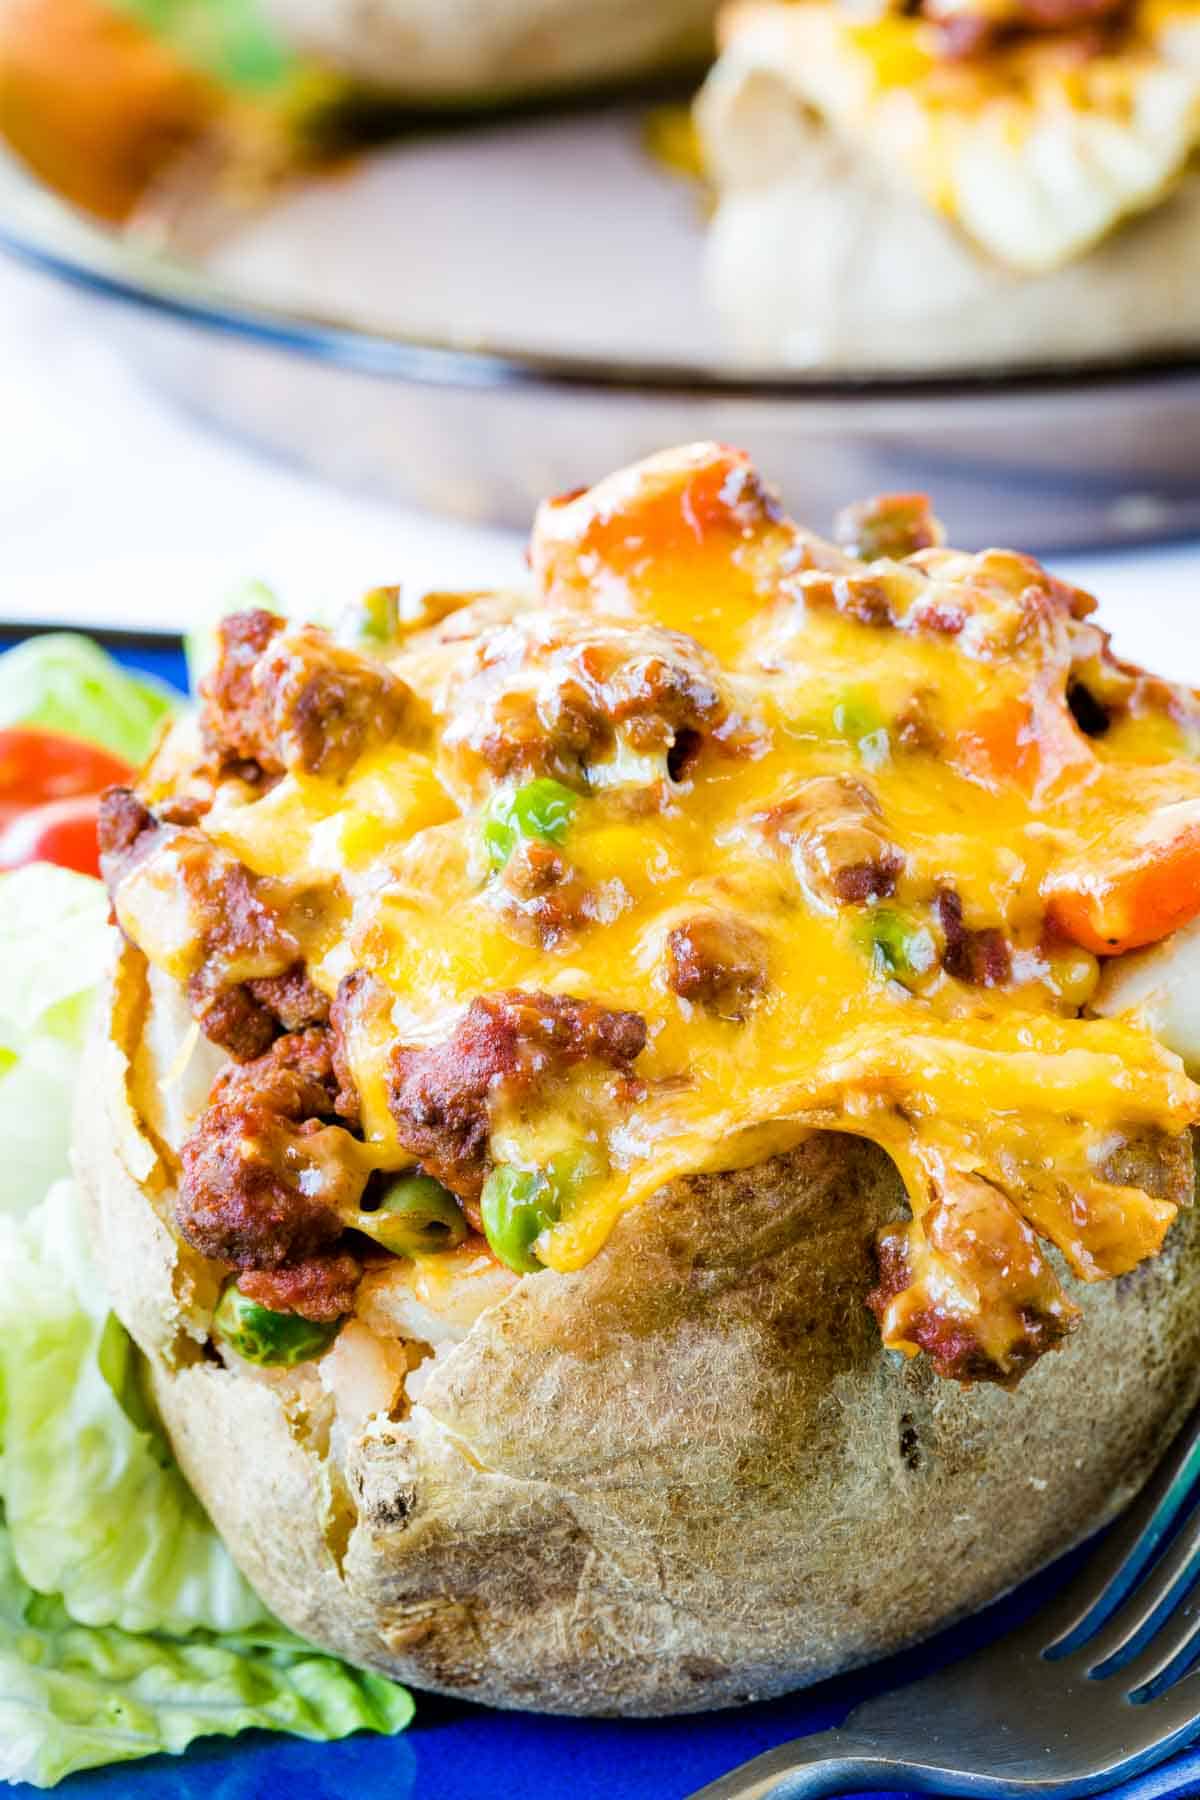 A closeup of a baked potato stuffed with ground beef and vegetables and topped with melted cheddar cheese.